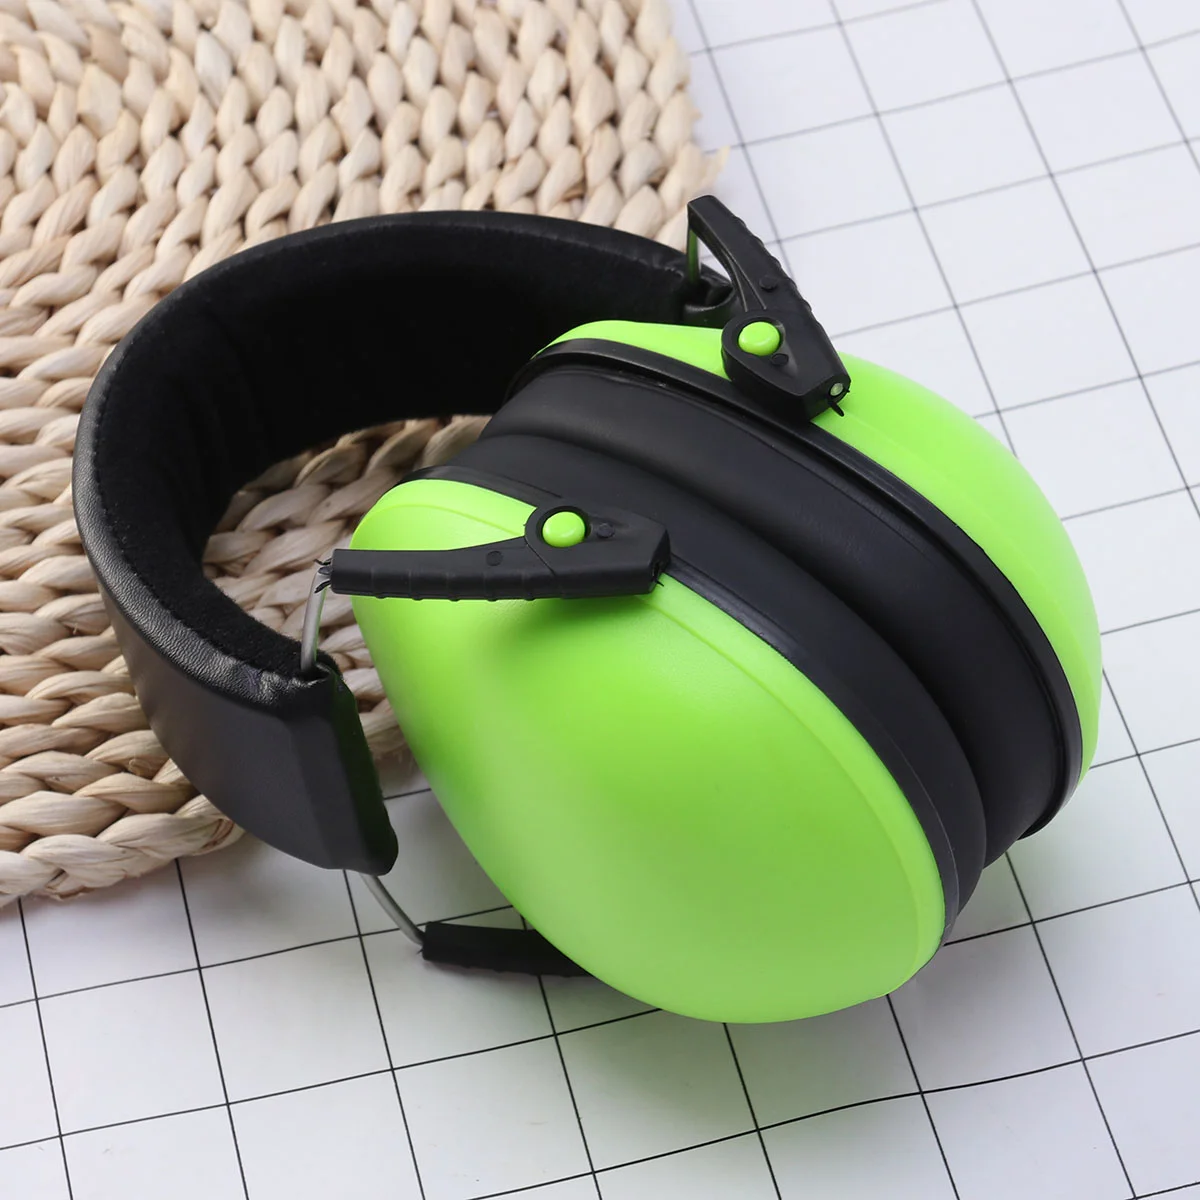 

Baby Hearing Protection Earmuff Noise Cancelling Ear Muffs for Sleep Play Study(Green)